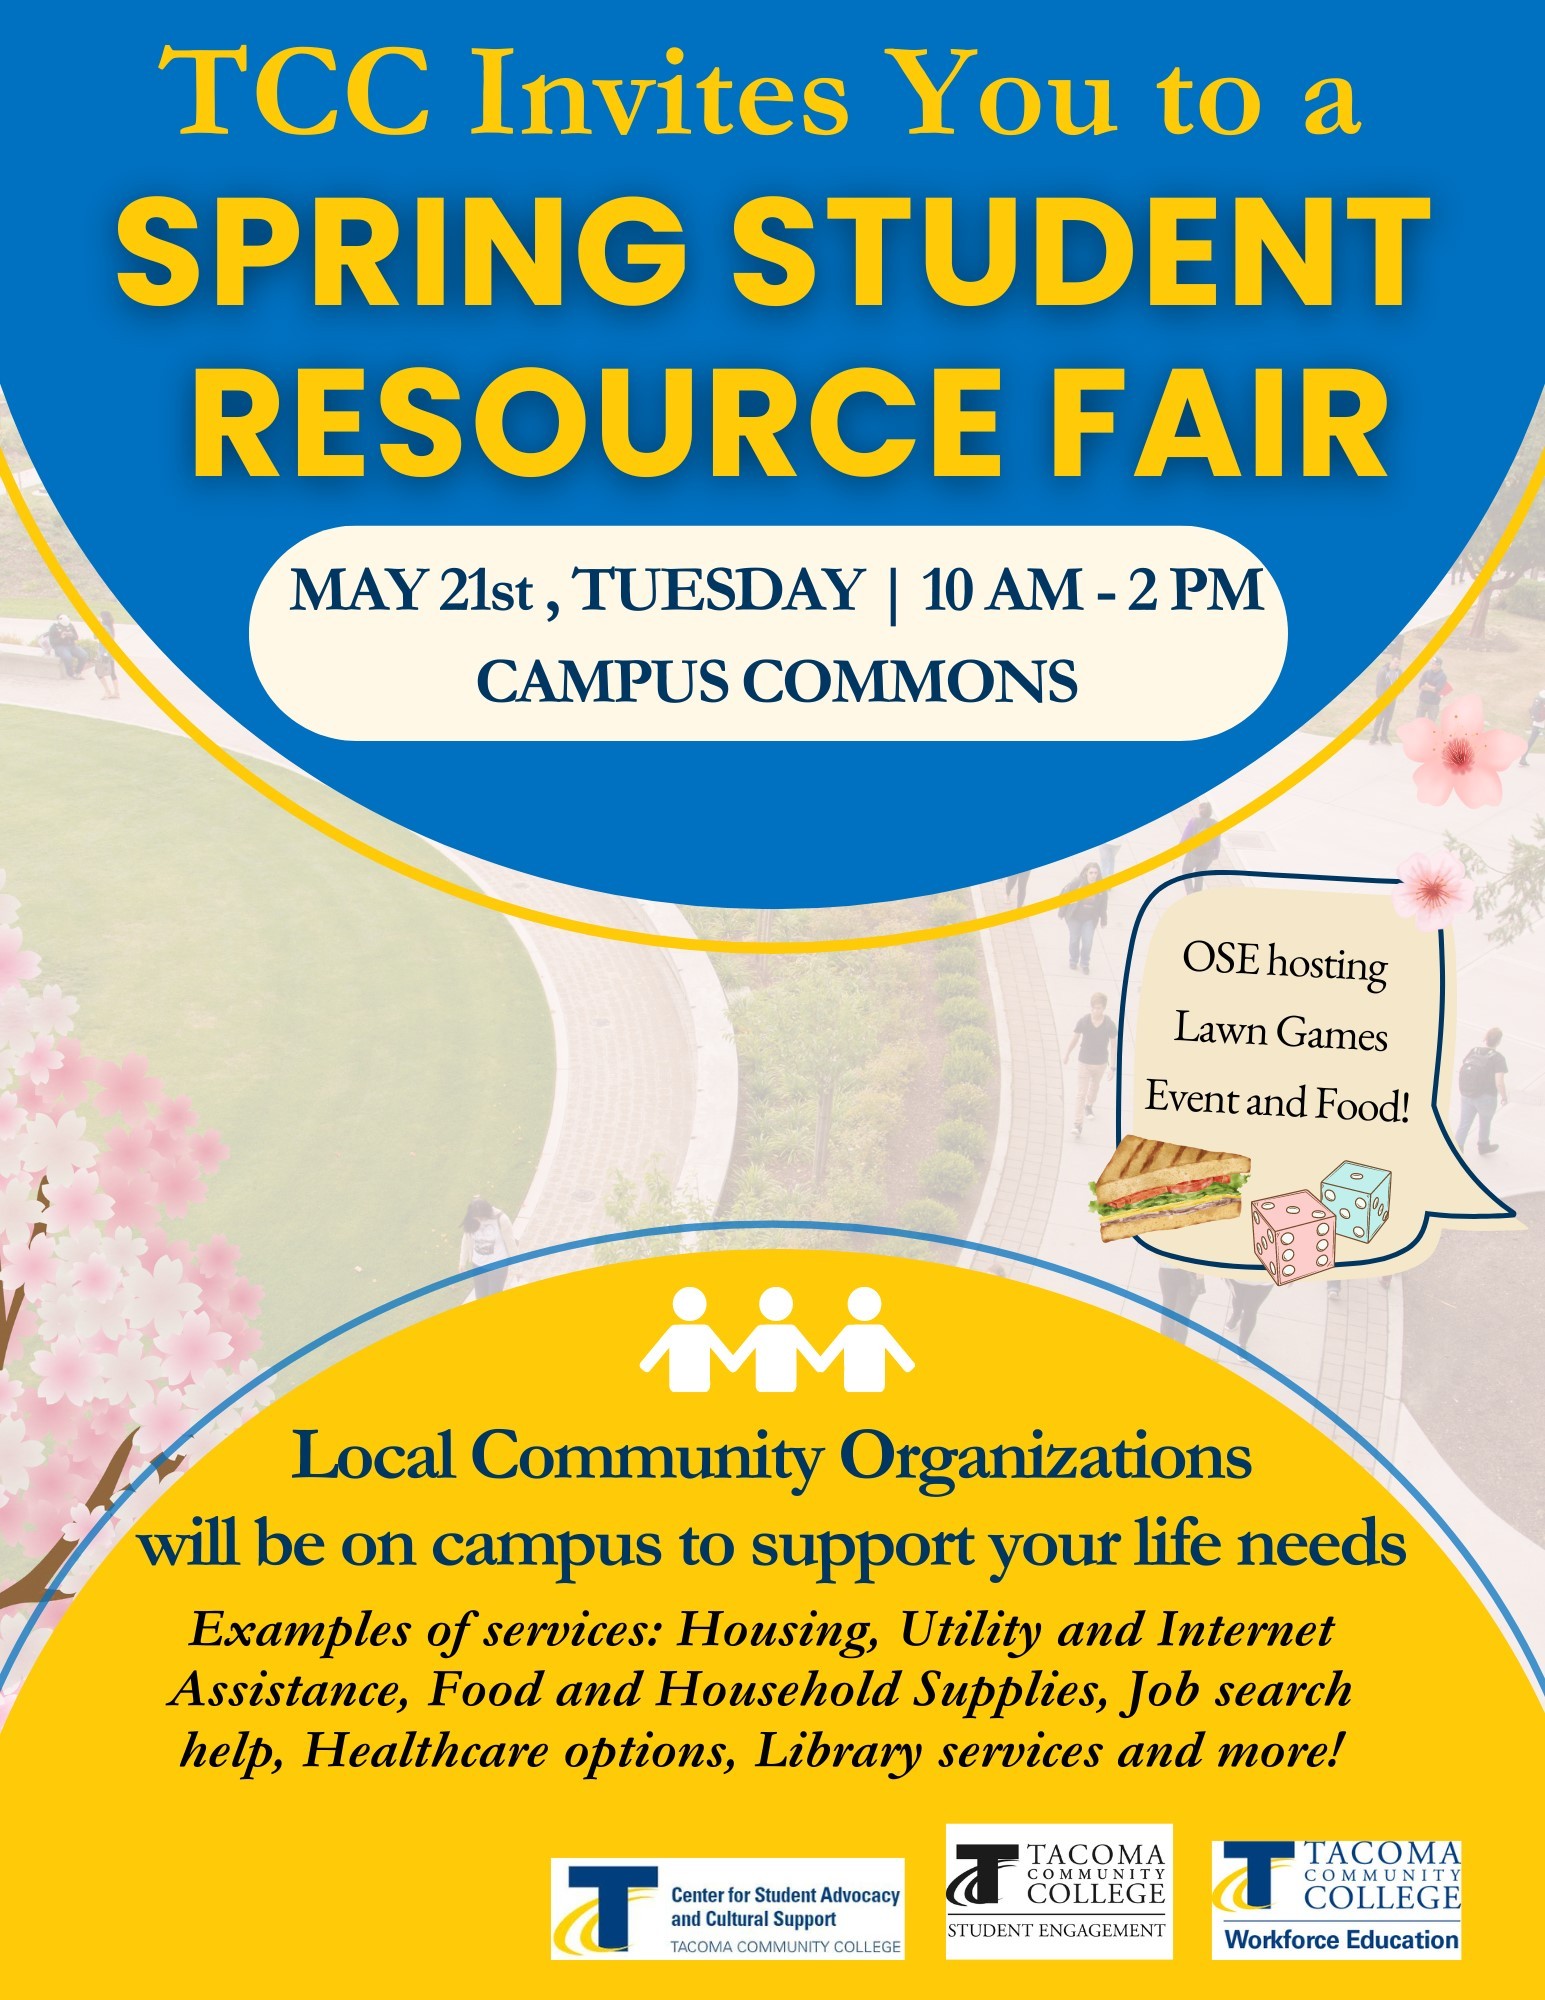 flyer for student resource fair, 10a - 2p May 21 in the Campus Commons. Community organizations will be on campus to support your life needs. 